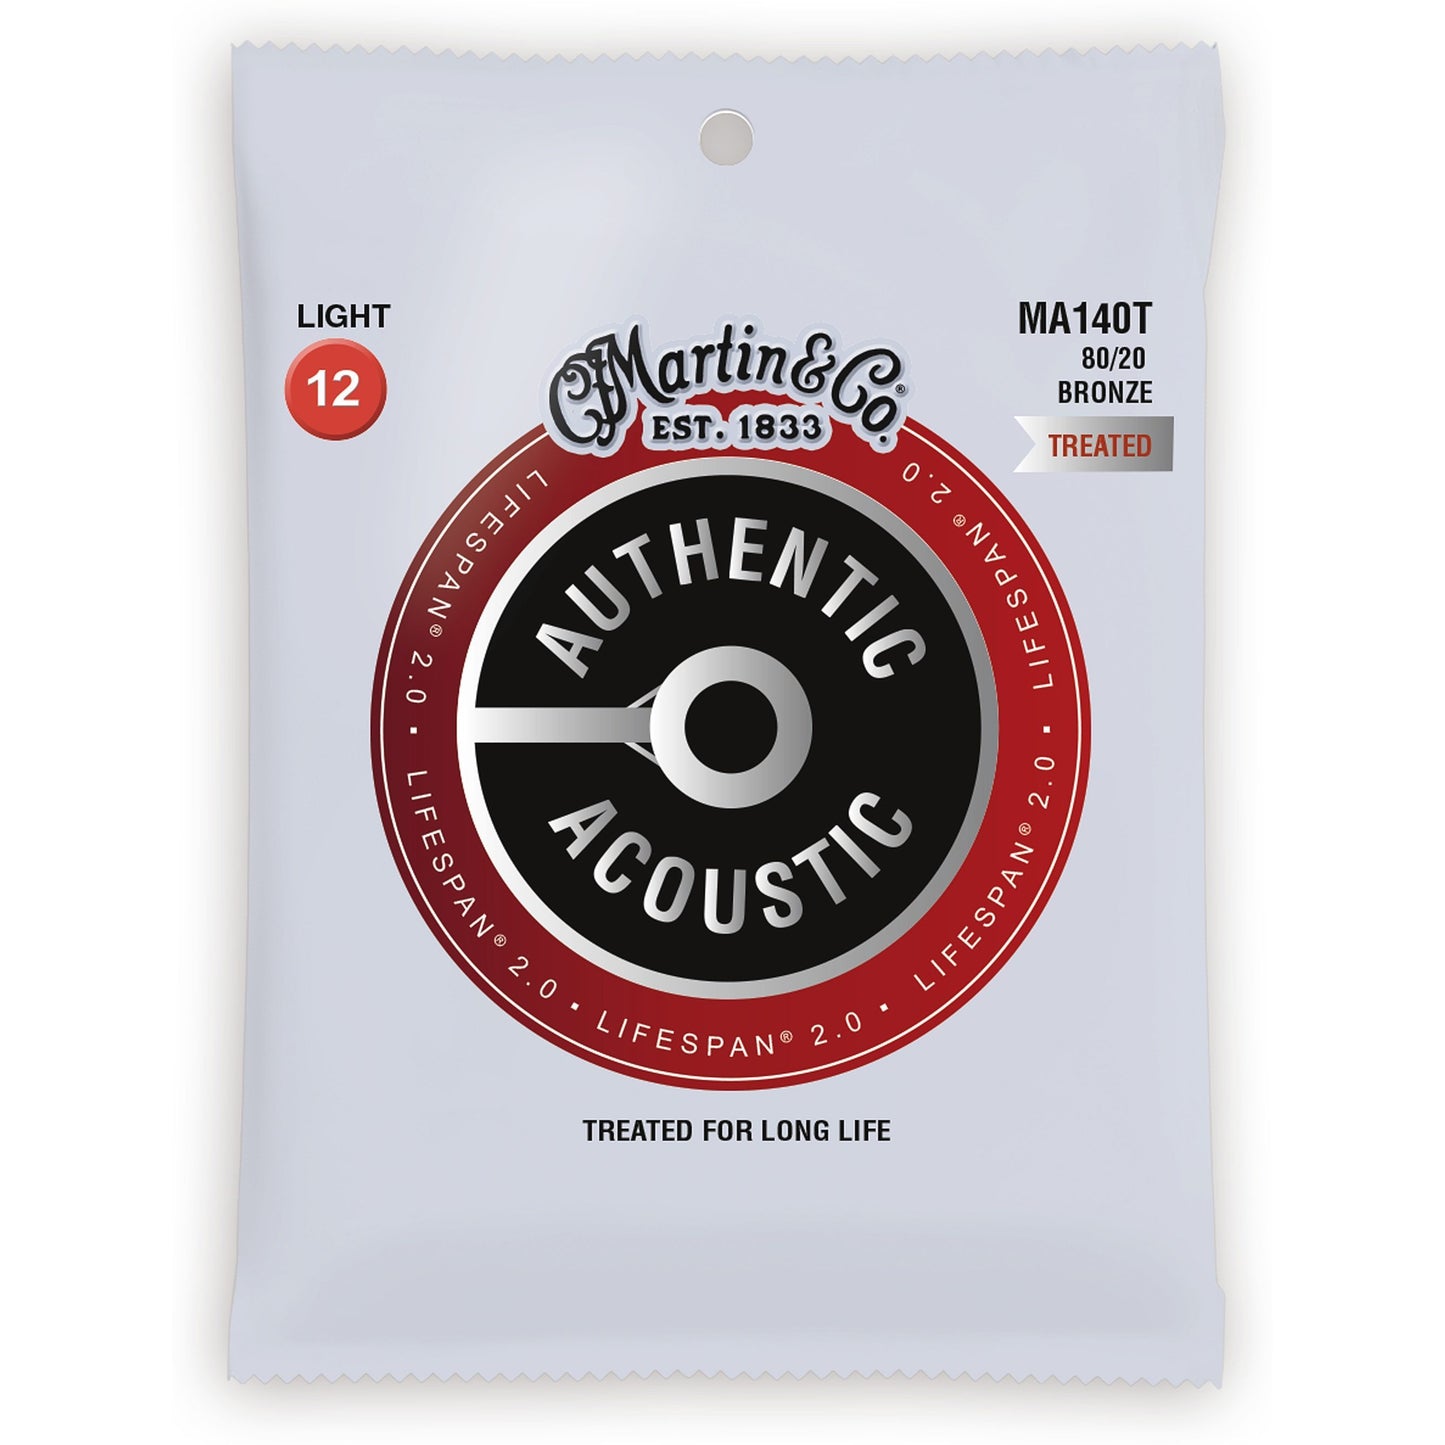 Martin Authentic Lifespan 2.0 Treated 80/20 Bronze Acoustic Guitar Strings, MA140T, Light